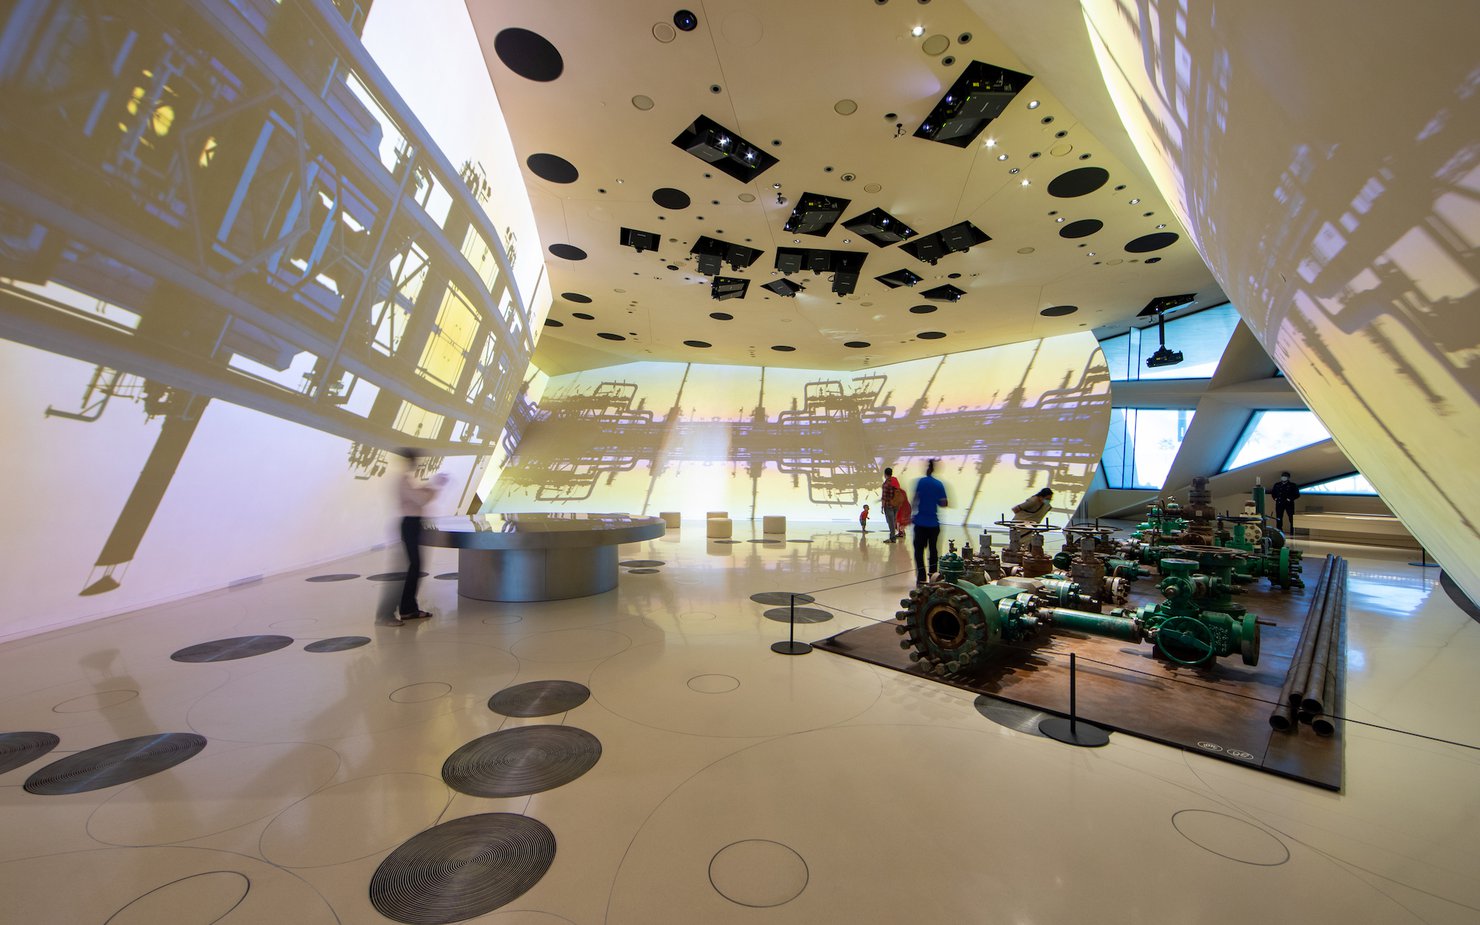 Interior of a gallery space at the National Museum of Qatar showcasing oil platform machinery